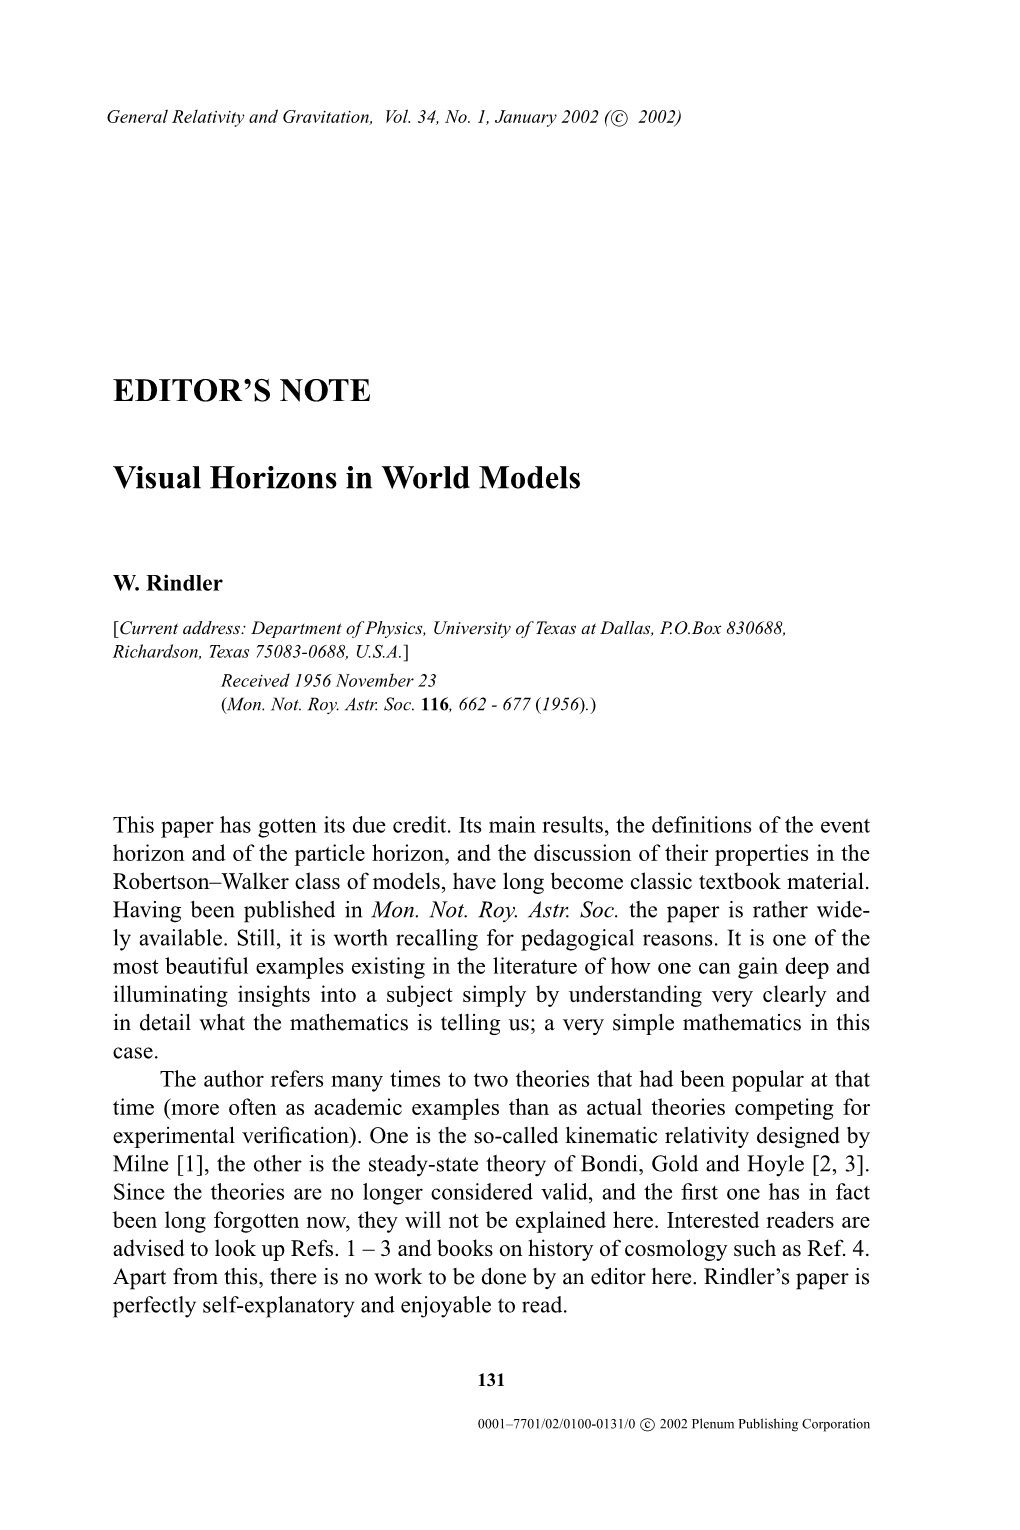 Visual Horizons in World Models by W. Rindler